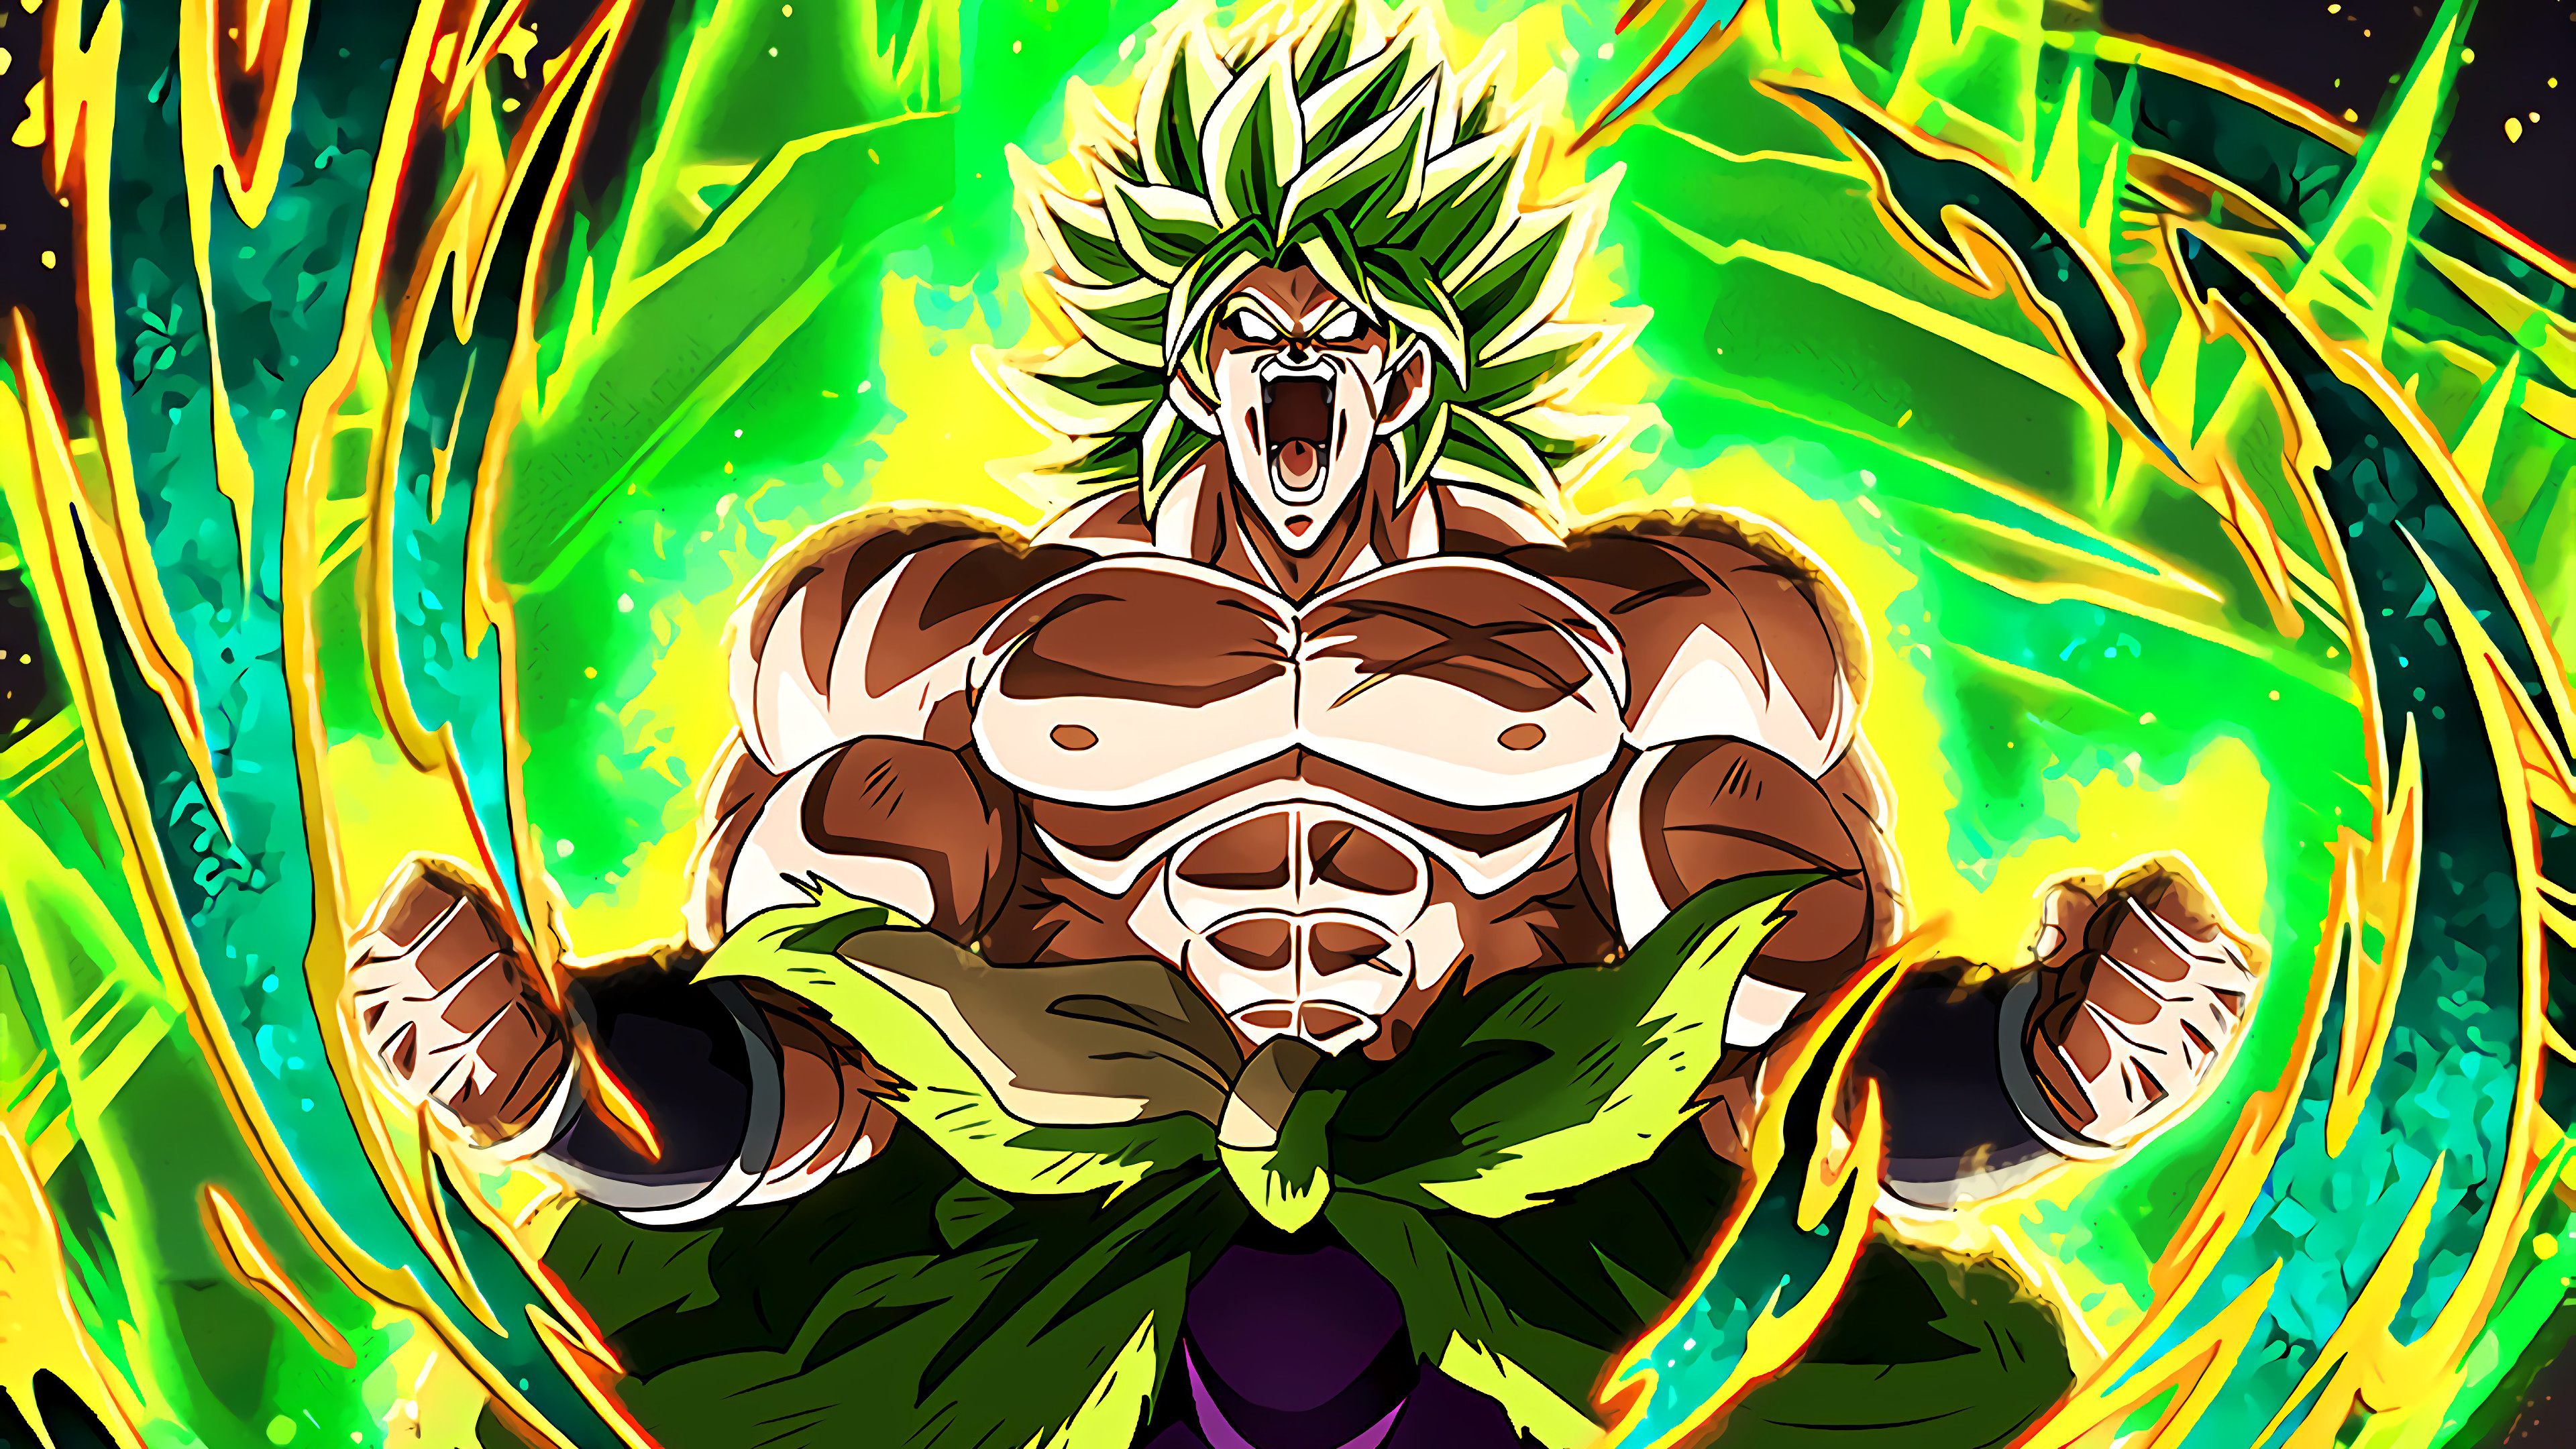 Dragon Ball Super: Broly Hd Wallpapers, Pictures, Images